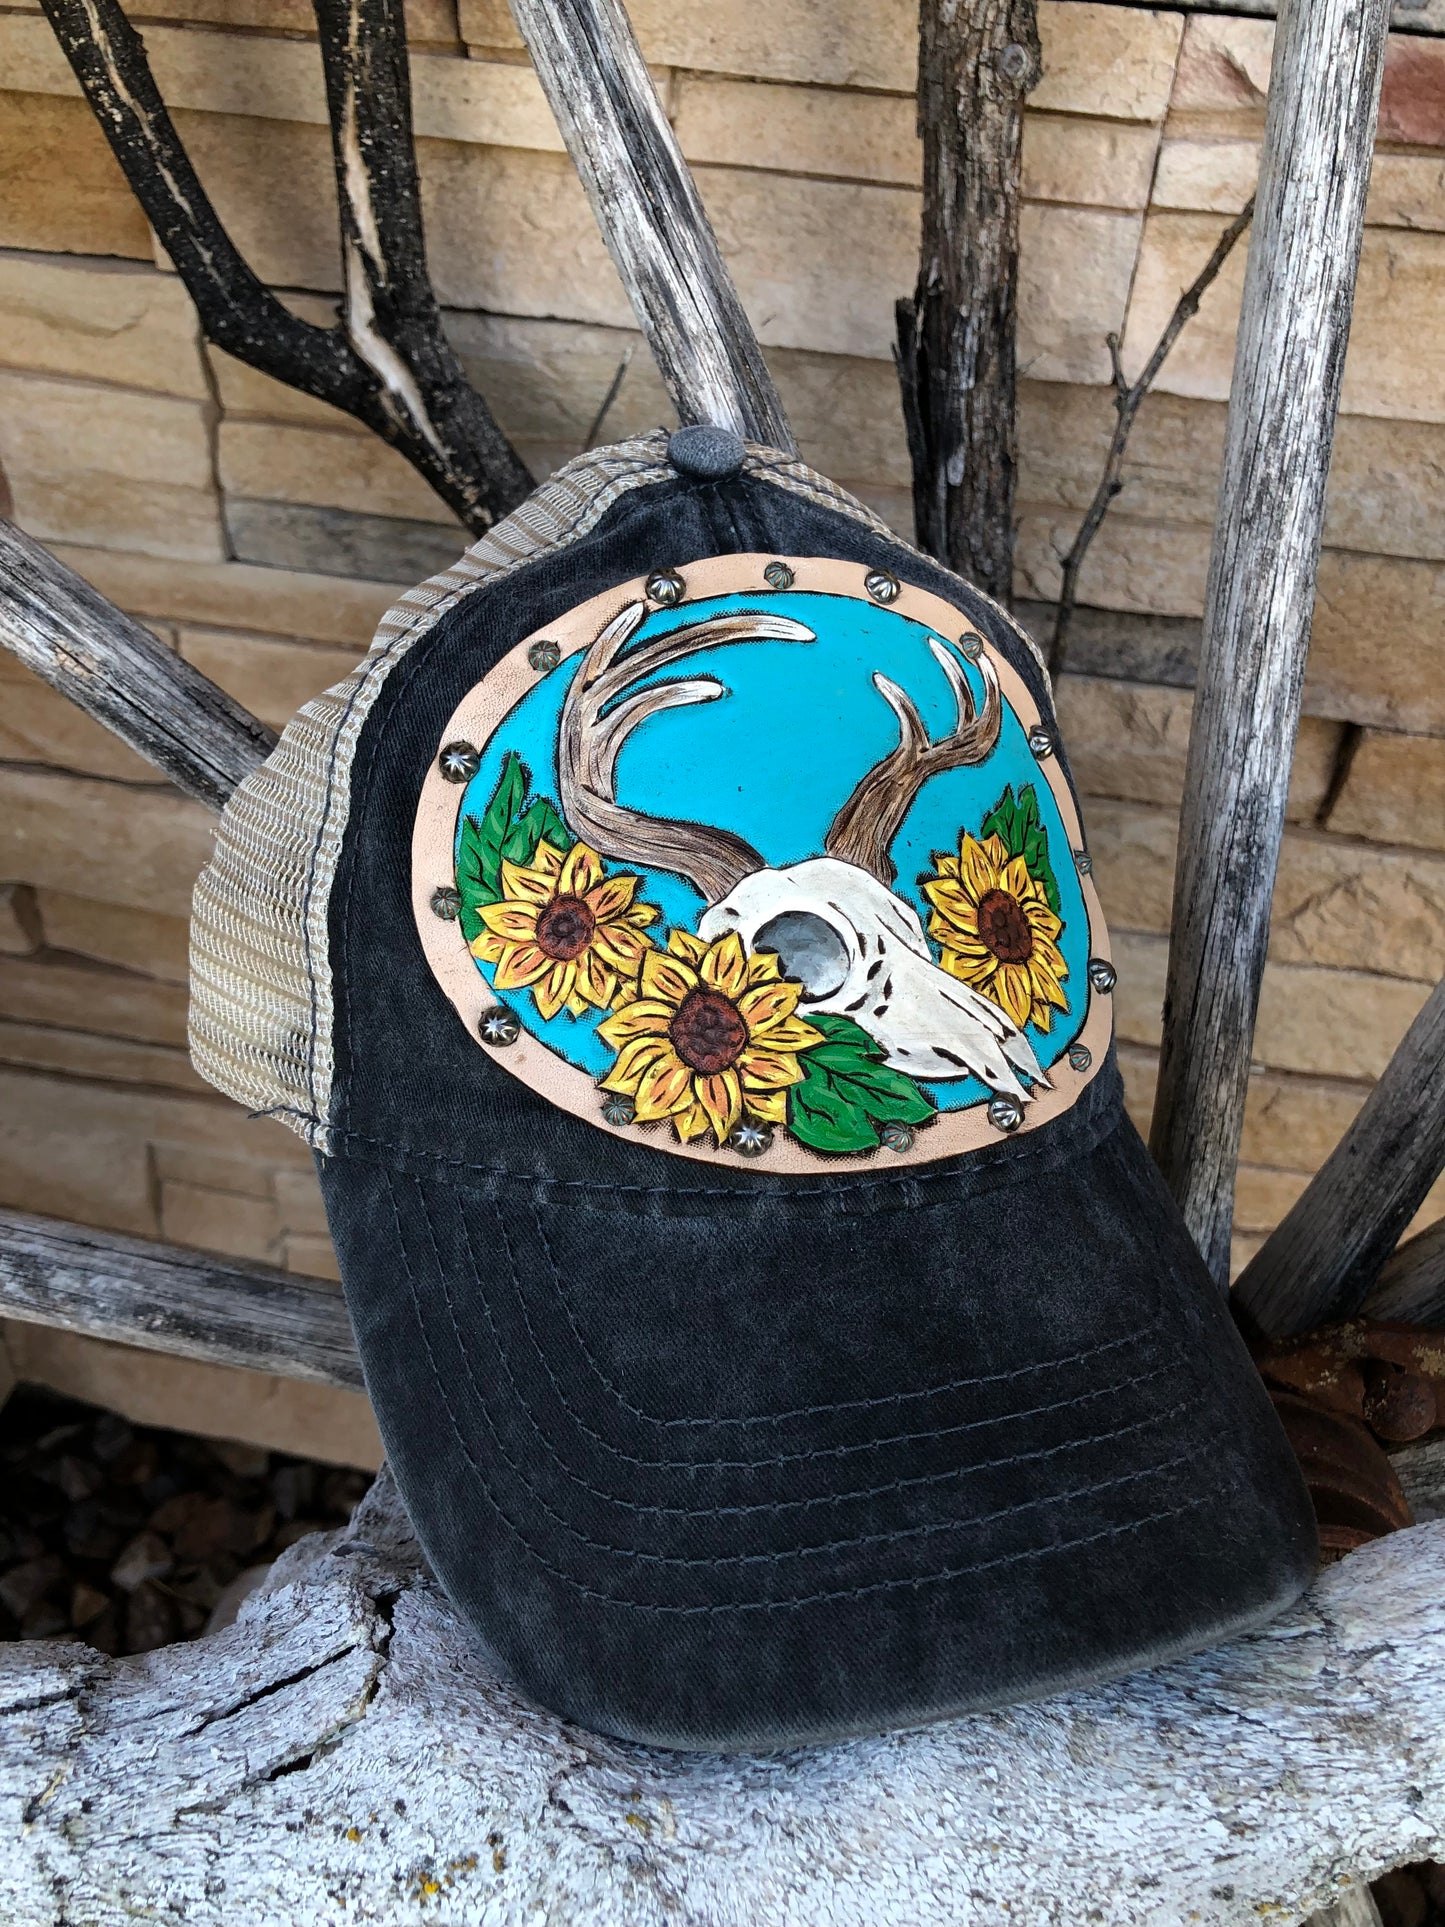 Western tooled leather deer skull and sunflower patch cap